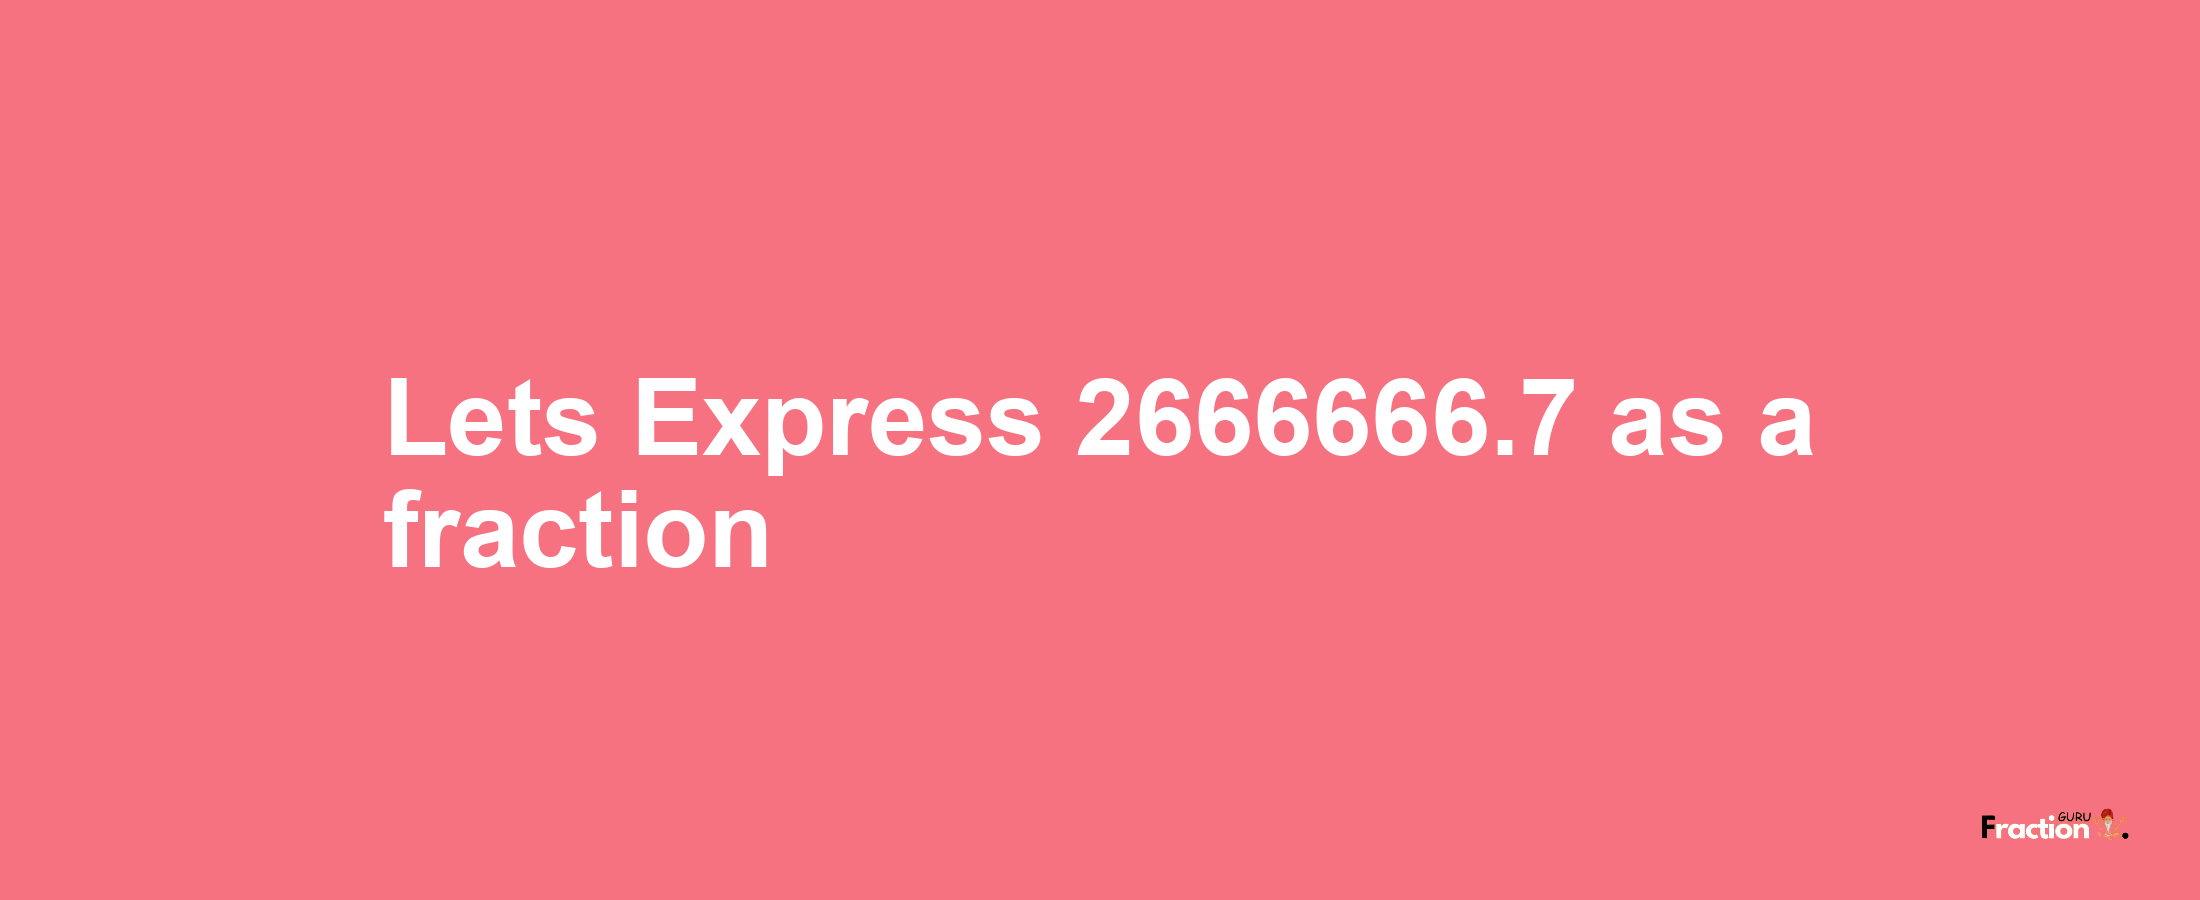 Lets Express 2666666.7 as afraction